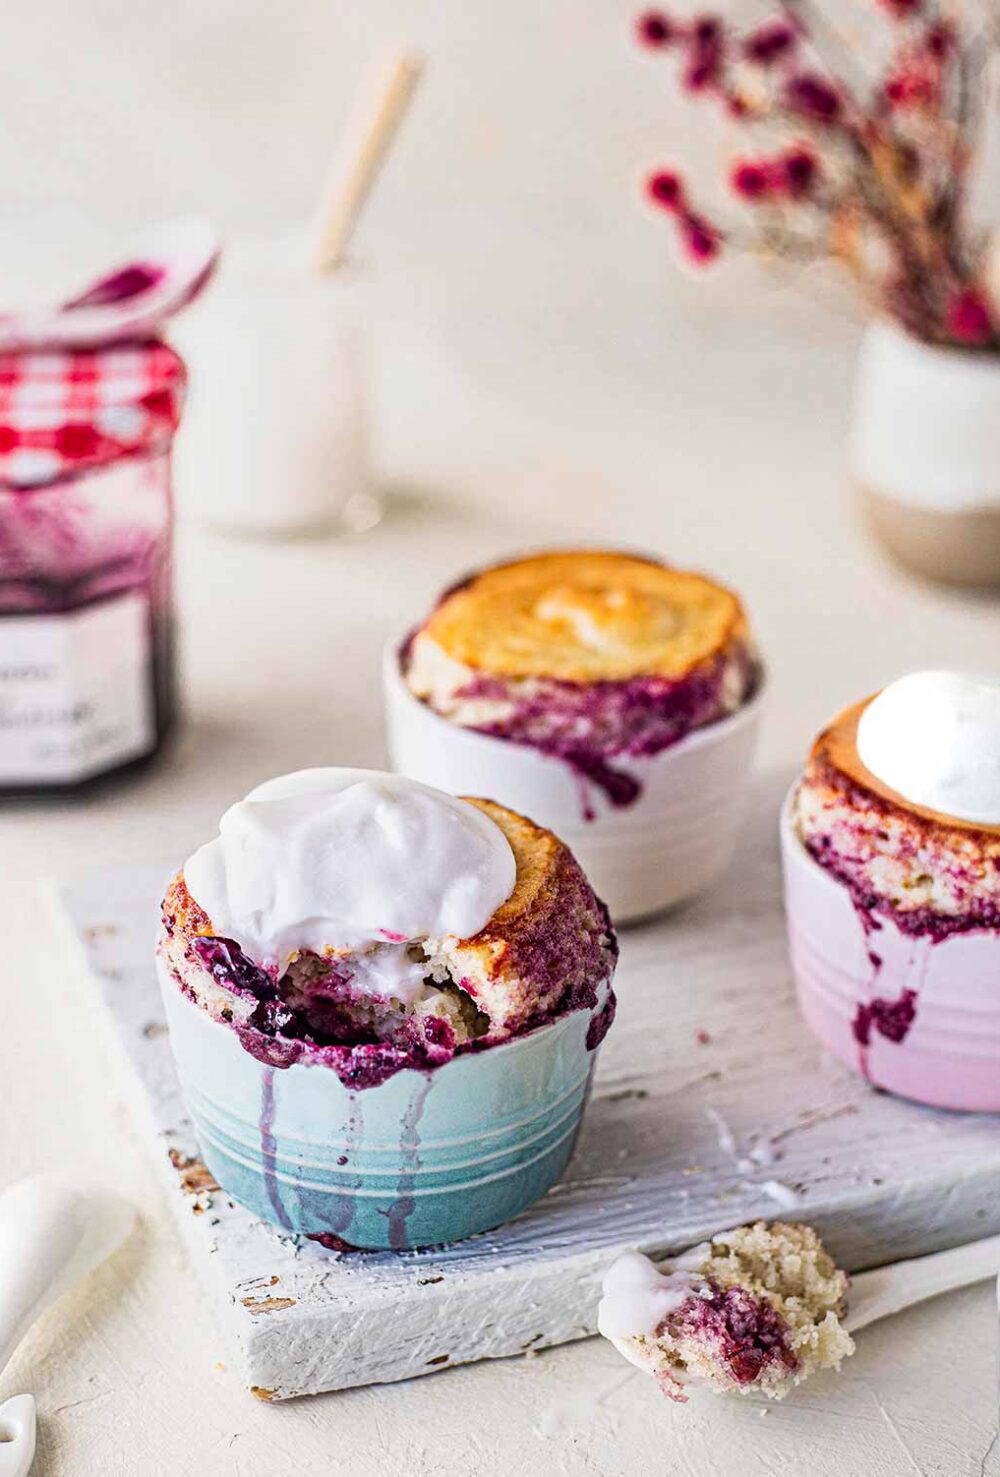 Self saucing puddings in little ramekins on white chopping board. Each pudding is bursting with jam on the sides and some are topped with yoghurt